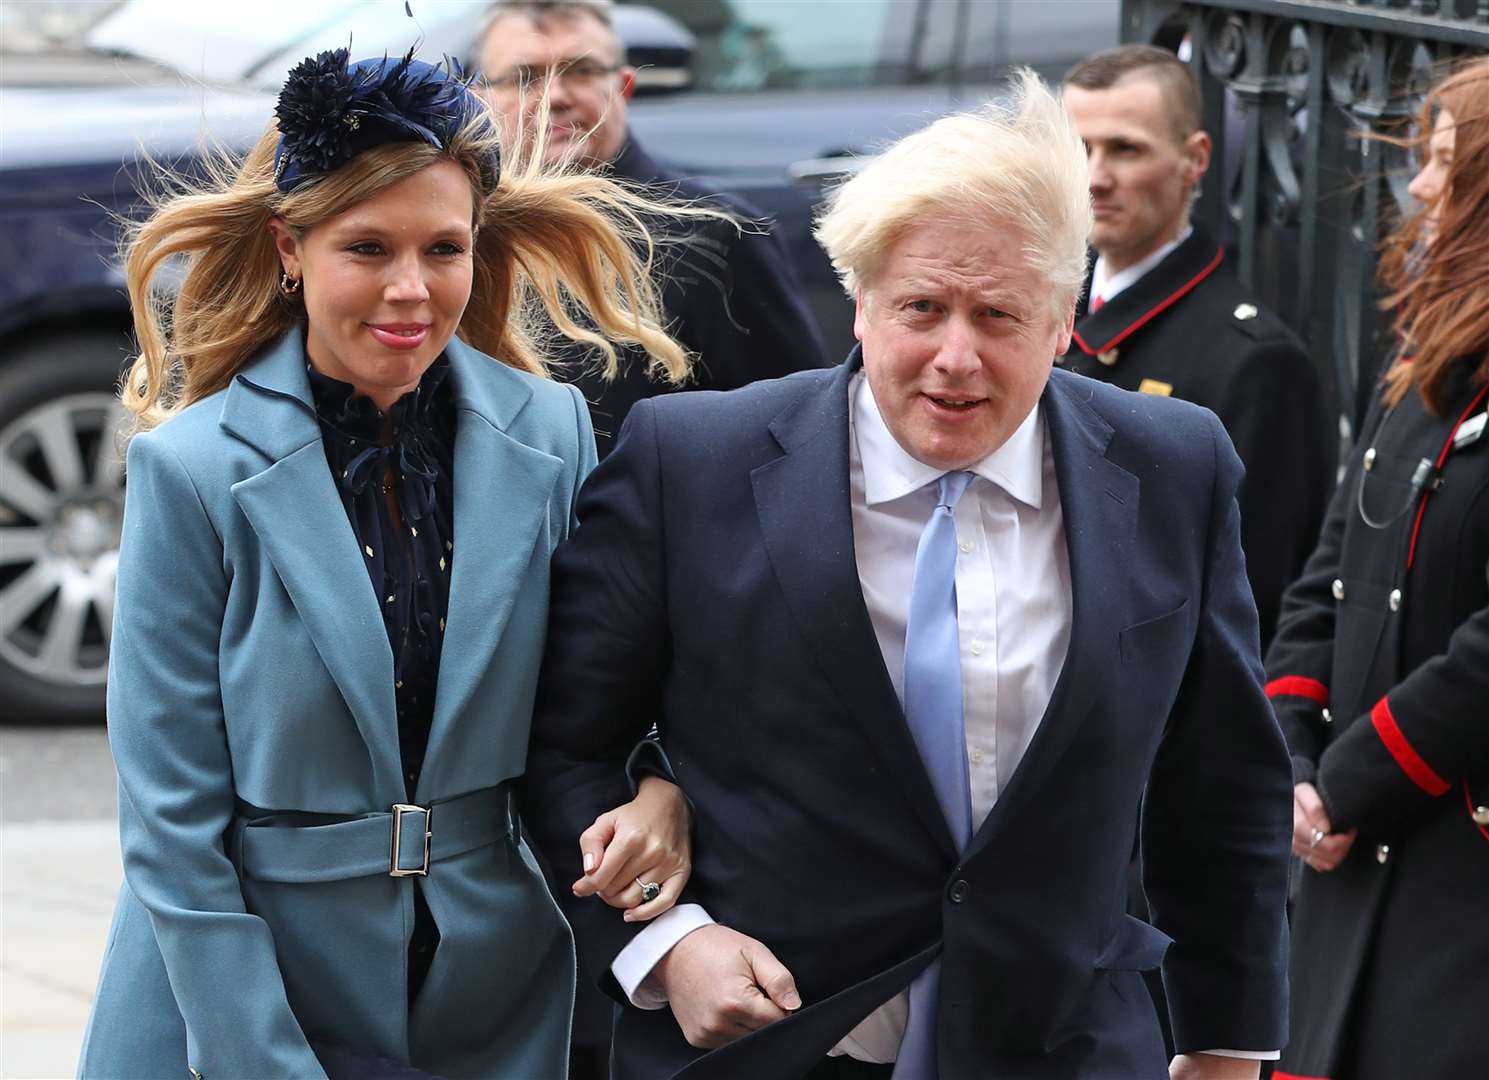 Prime Minister Boris Johnson and partner Carrie Symonds arrive at the Commonwealth Service at Westminster Abbey (Yui Mok/PA)